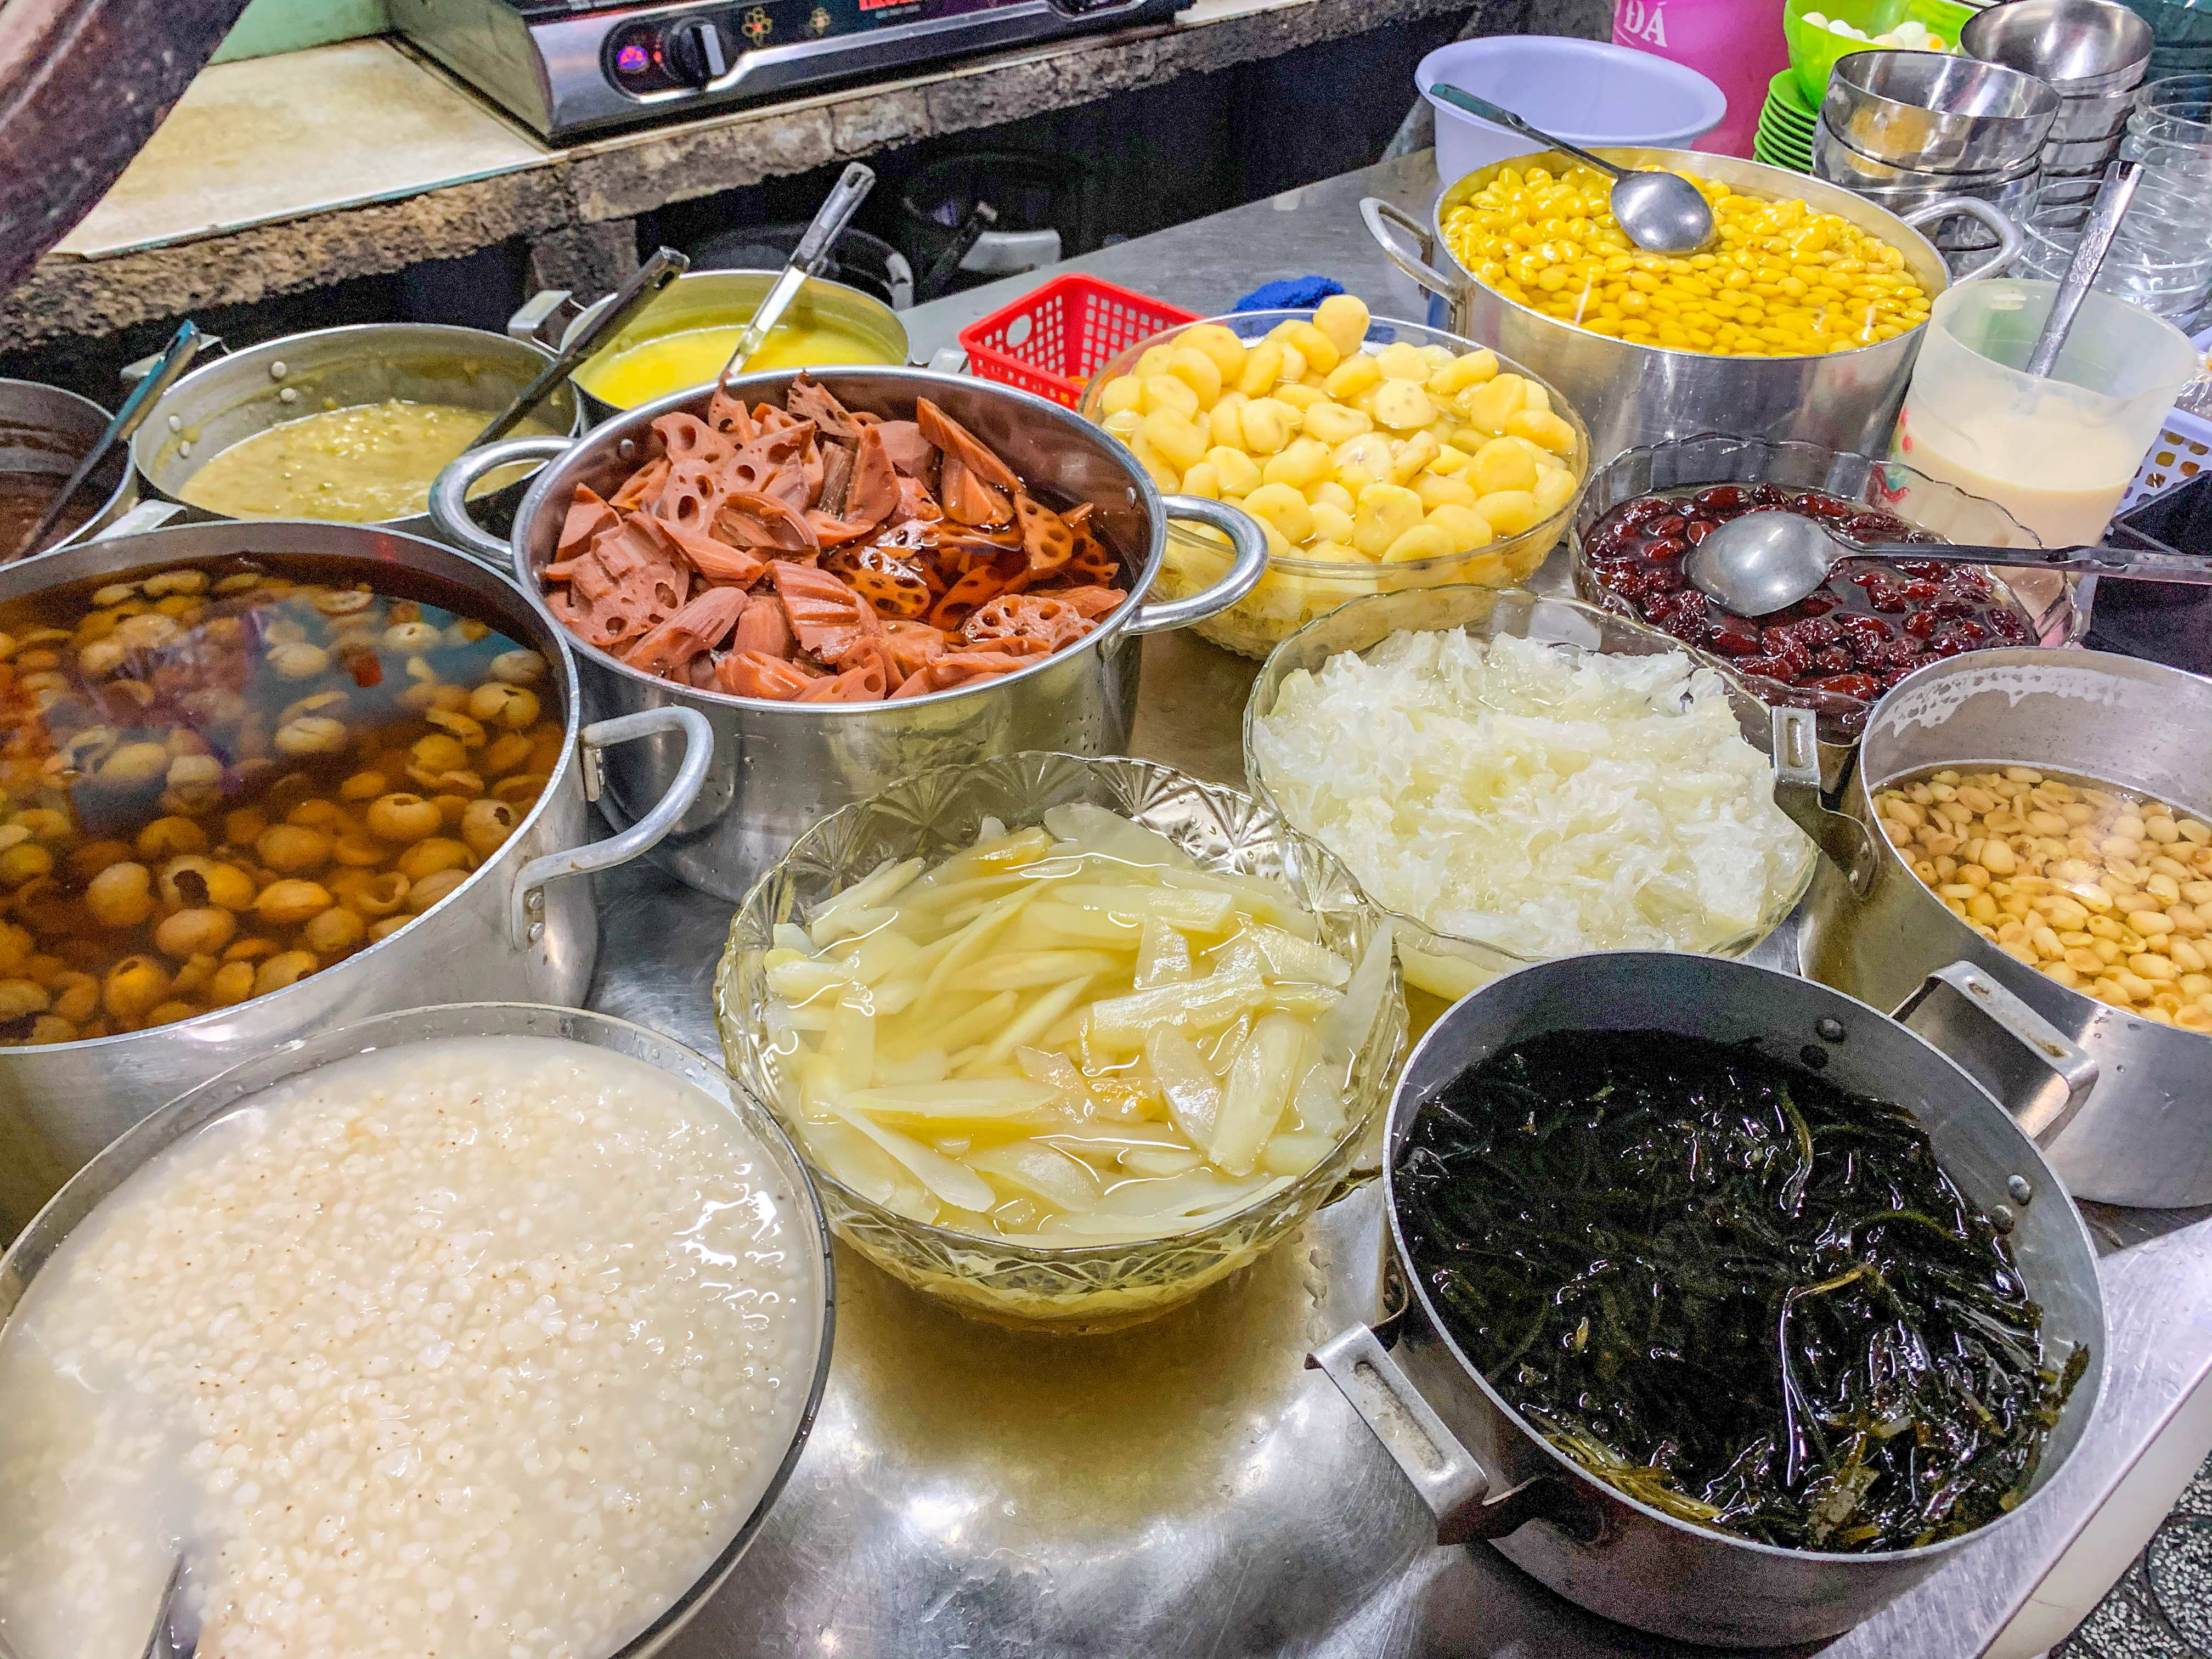 Homemade ingredients neatly organized at a sweet dessert stall in District 5, Ho Chi Minh City. Photo: Linh To / Tuoi Tre News